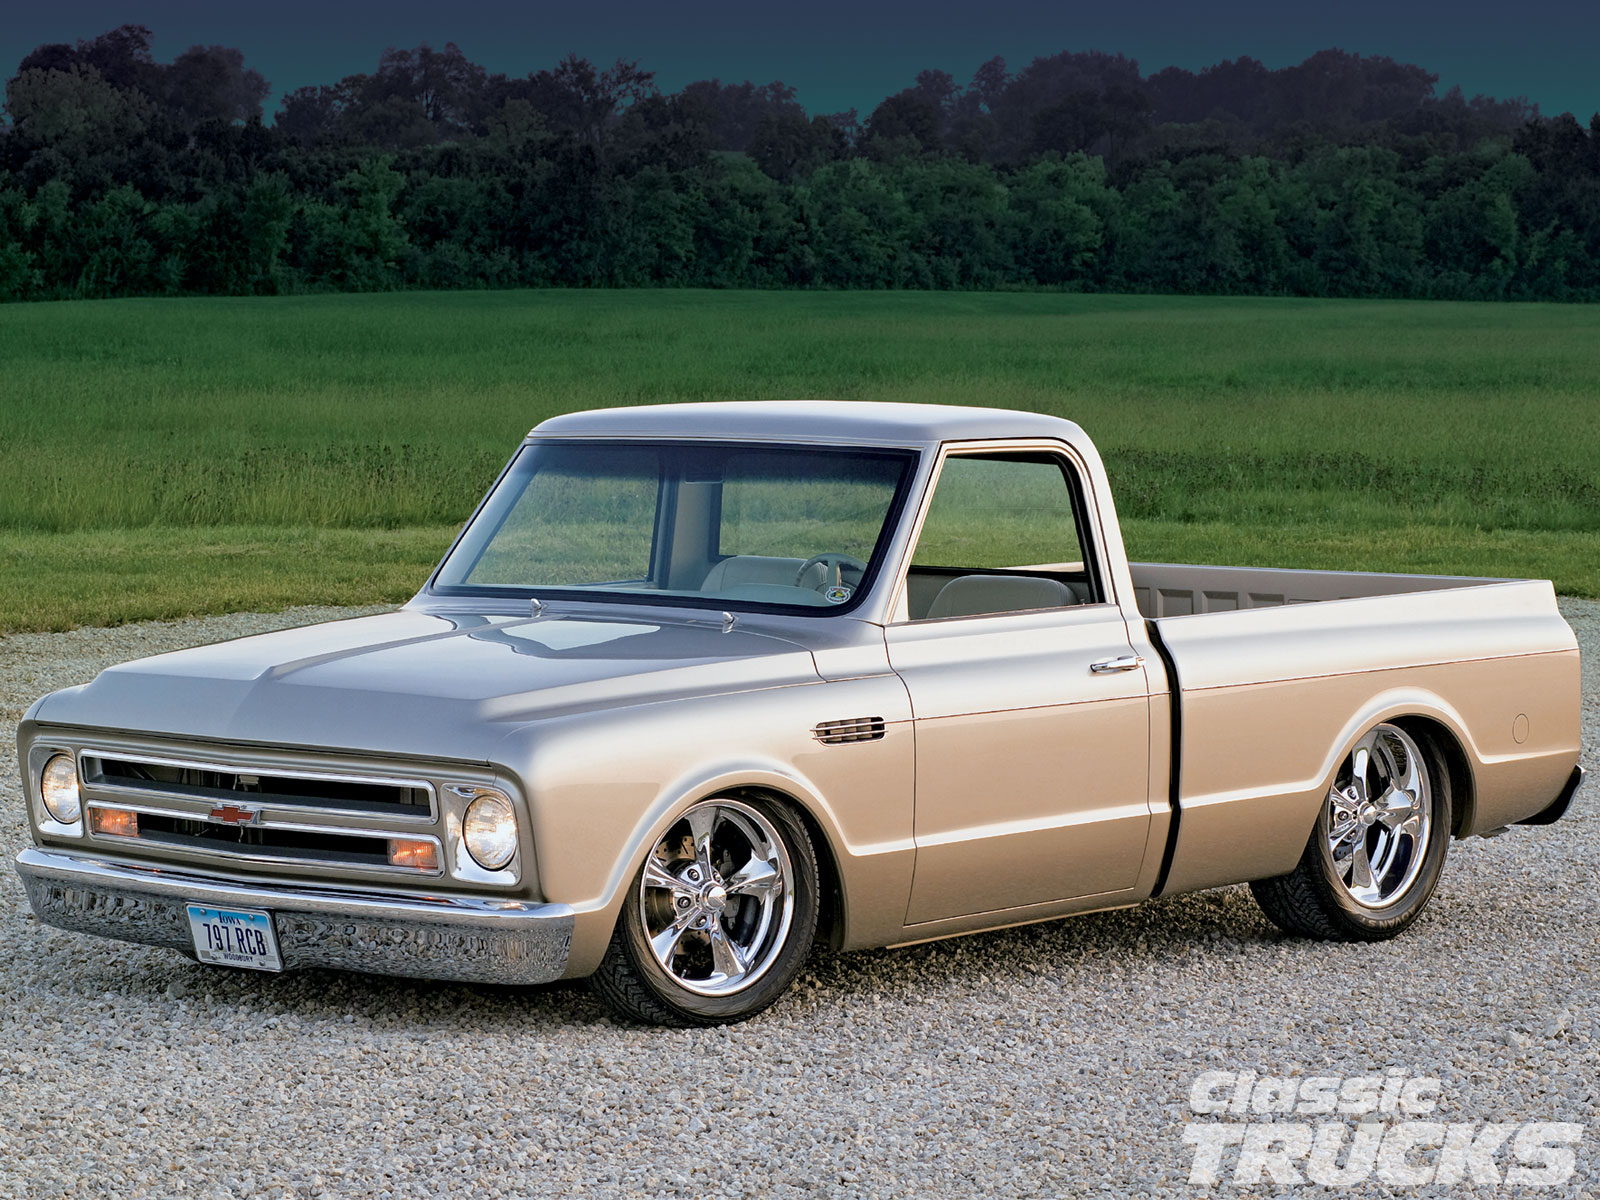 1005clt 01 O 1968 Chevy C10 Pickup Truck Front Grill - Pick Up Chevrolet 68 , HD Wallpaper & Backgrounds